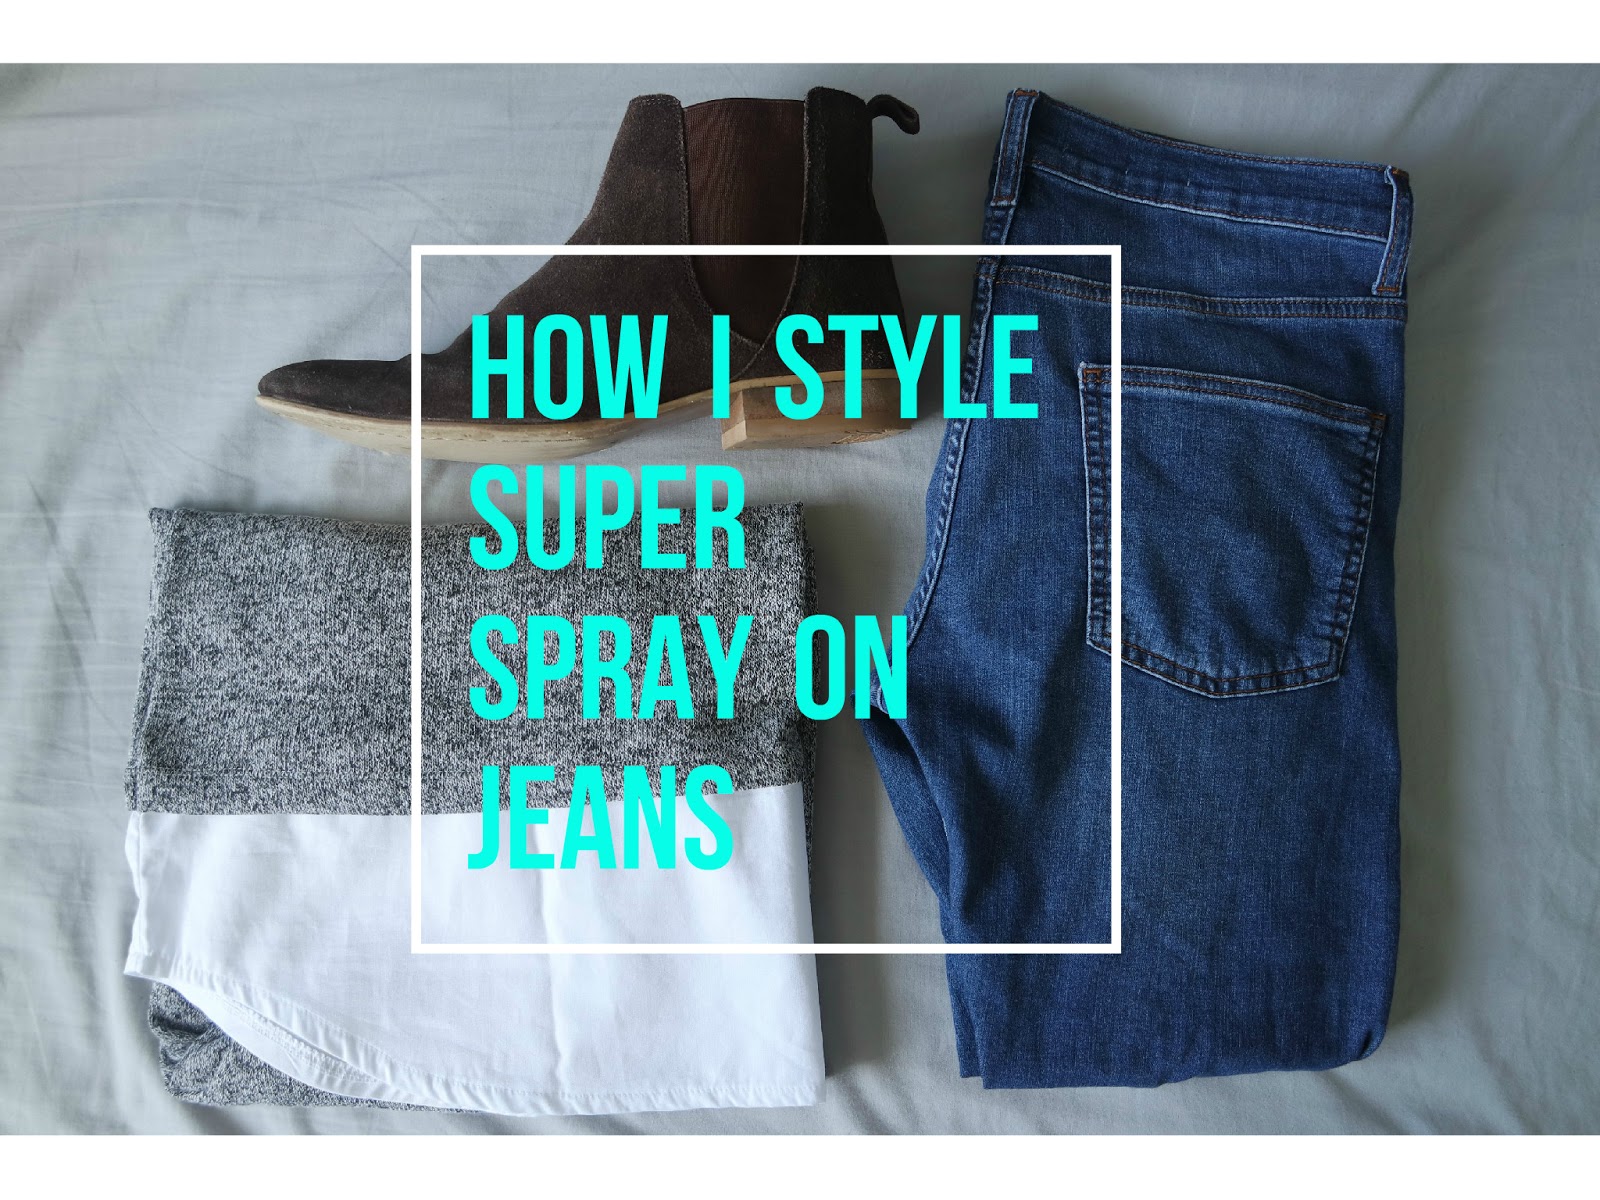 IYAAJAY // MENS STYLE BLOG: HOW I STYLE SUPER SPRAY JEANS ft TOPMAN AND ...